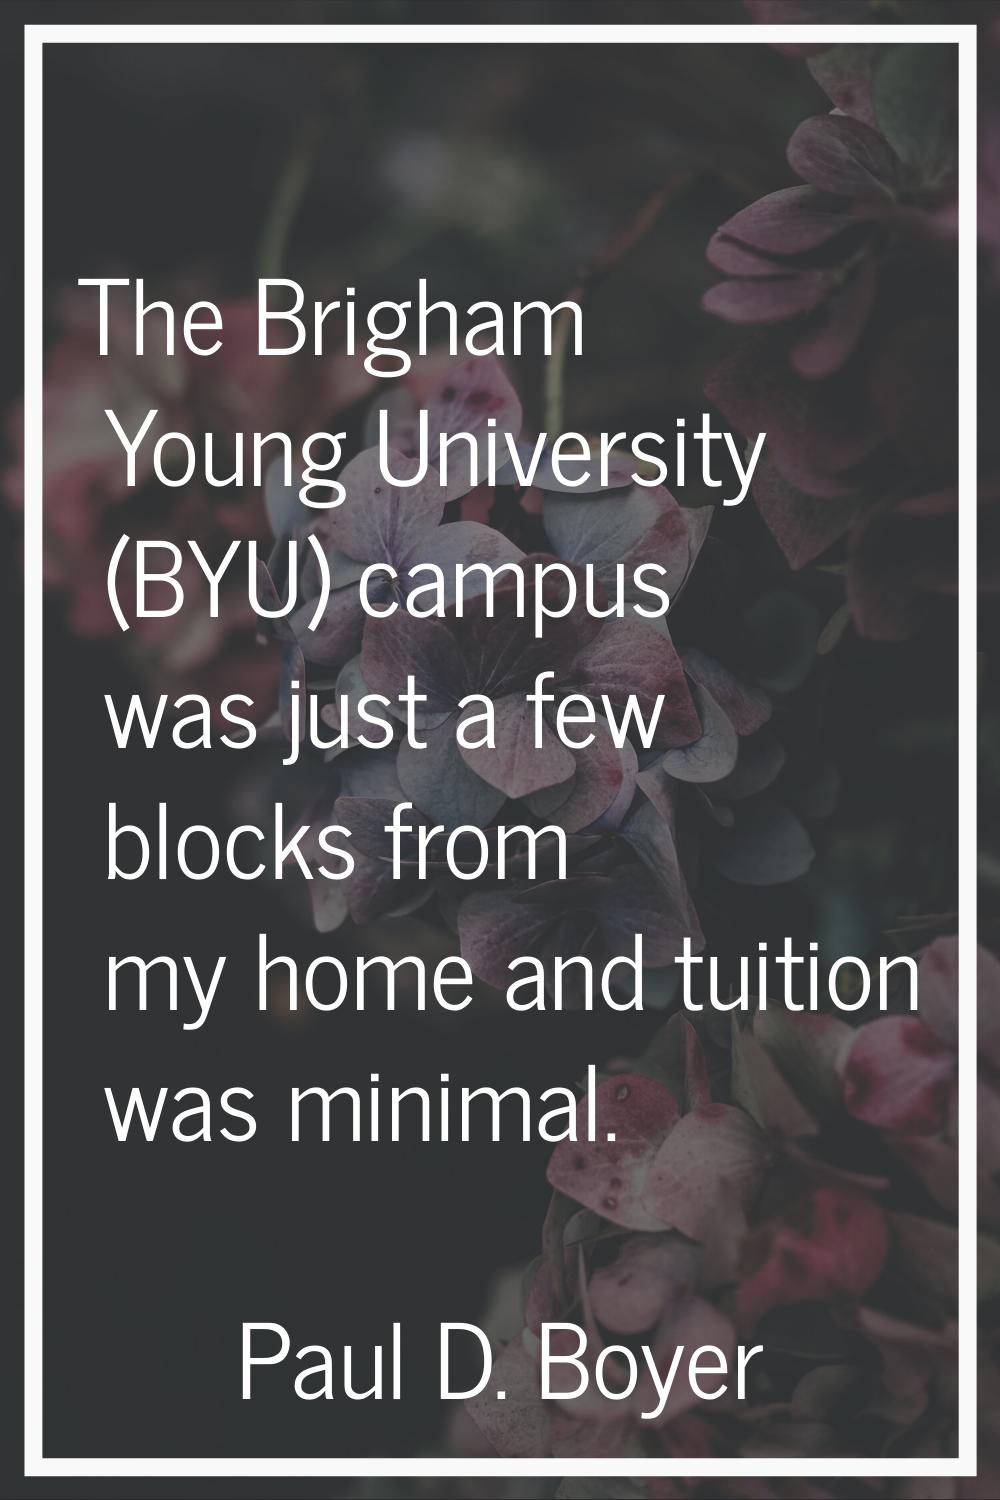 The Brigham Young University (BYU) campus was just a few blocks from my home and tuition was minima